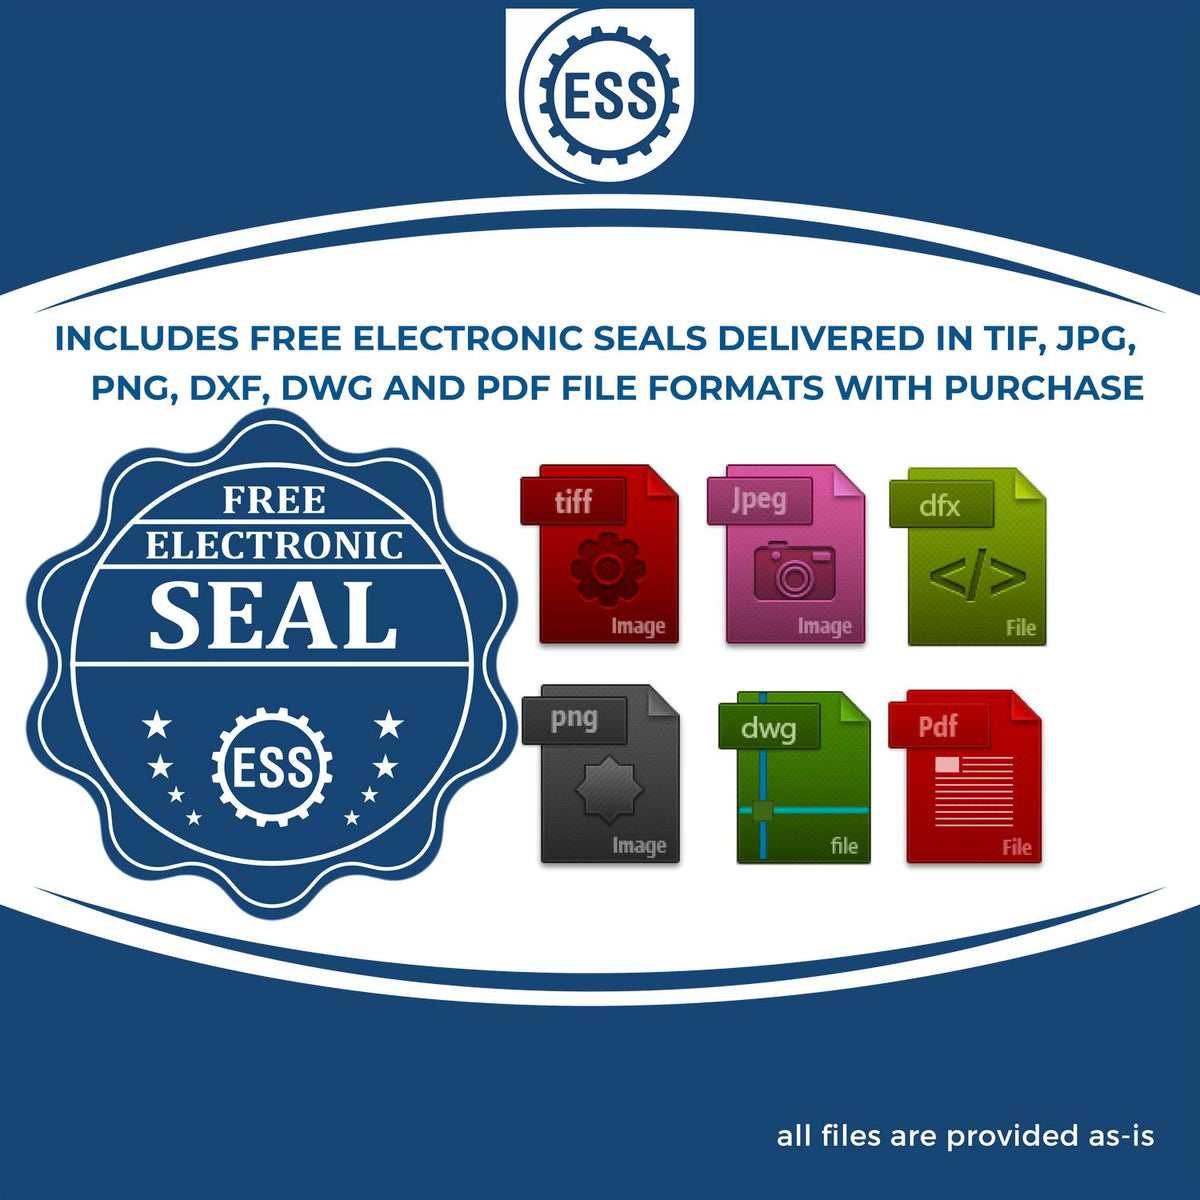 An infographic for the free electronic seal for the Slim Pre-Inked Idaho Professional Geologist Seal Stamp illustrating the different file type icons such as DXF, DWG, TIF, JPG and PNG.